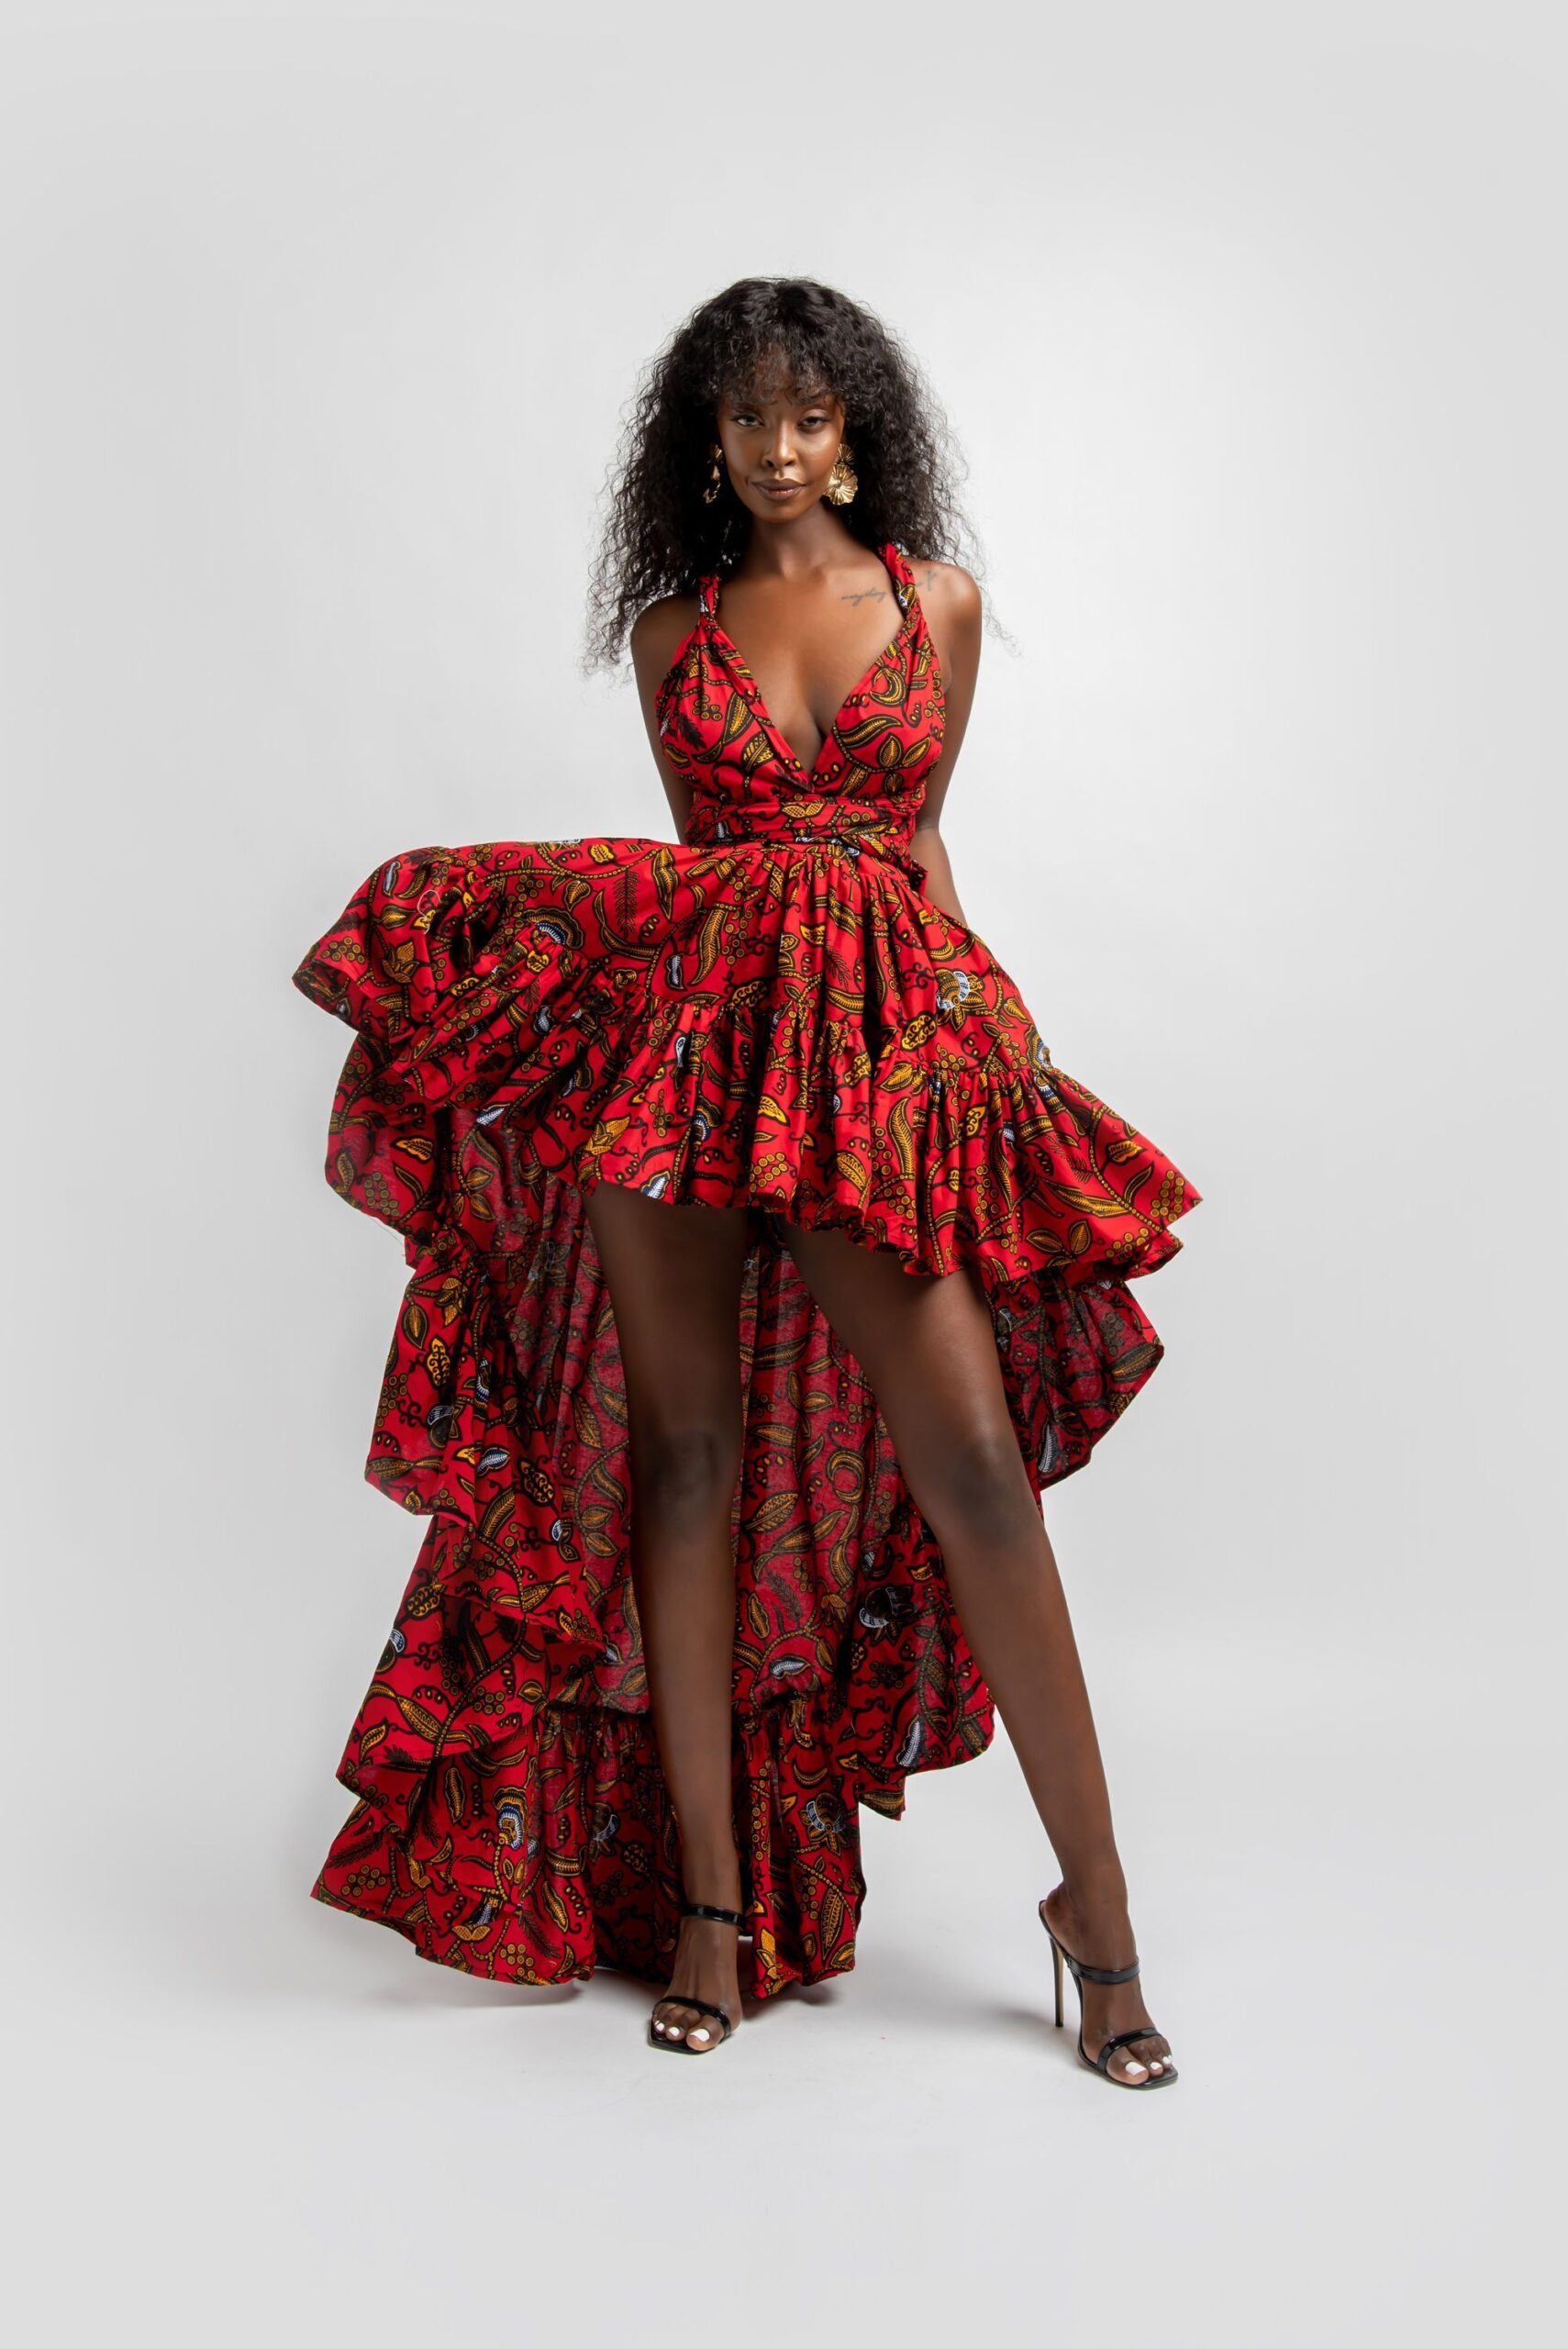 African Dresses: Celebrating Culture with Vibrant and Unique Designs